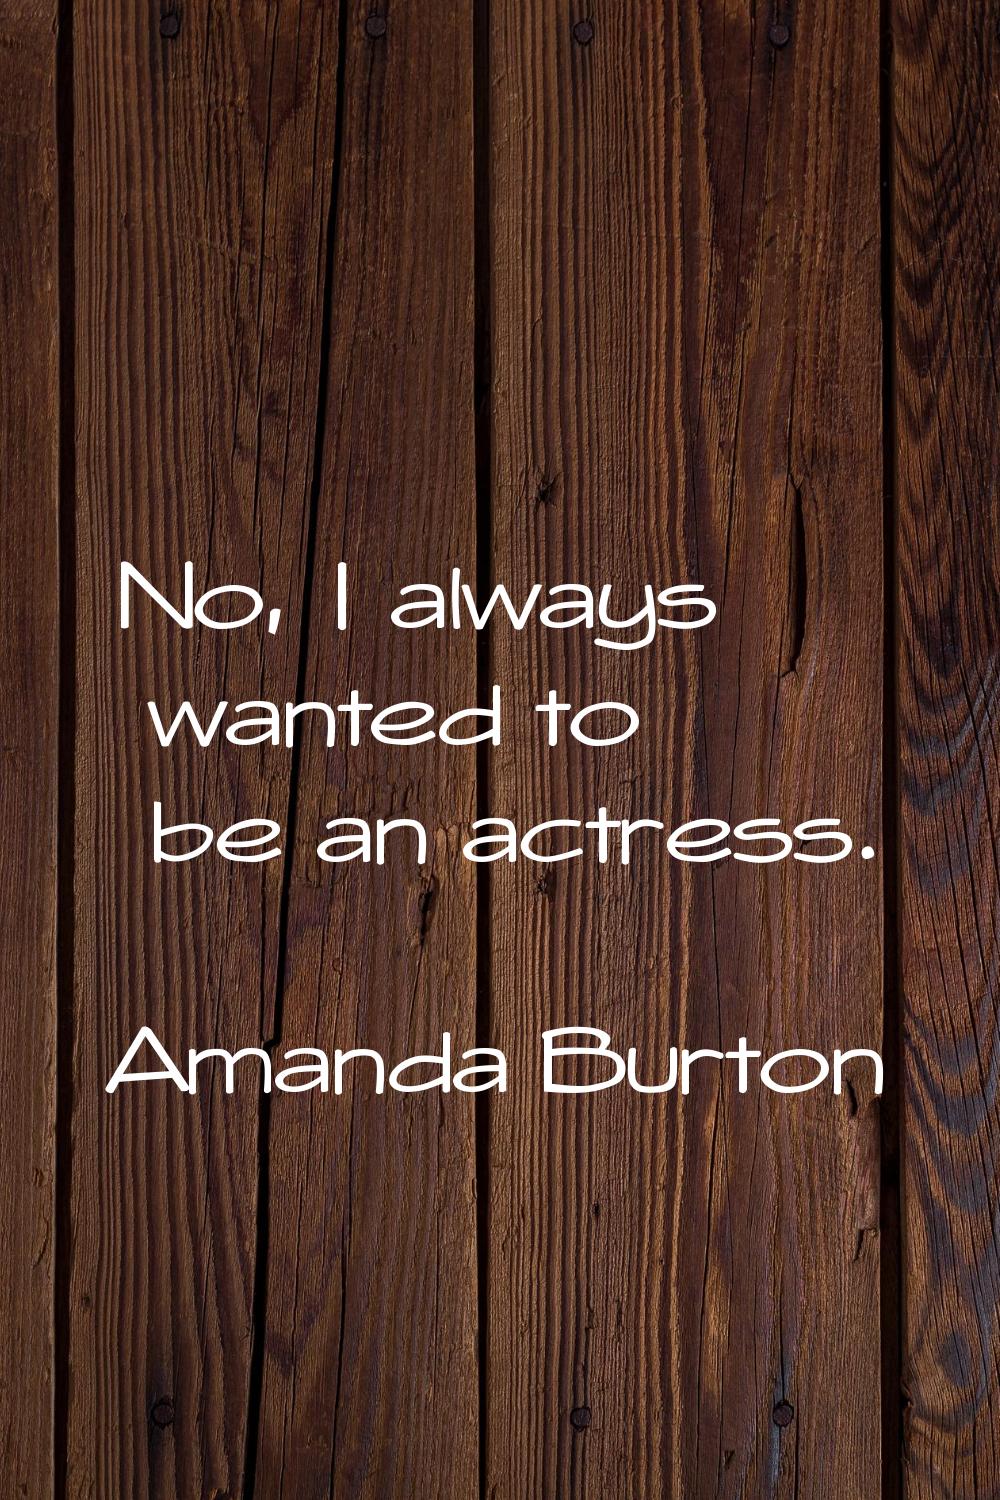 No, I always wanted to be an actress.